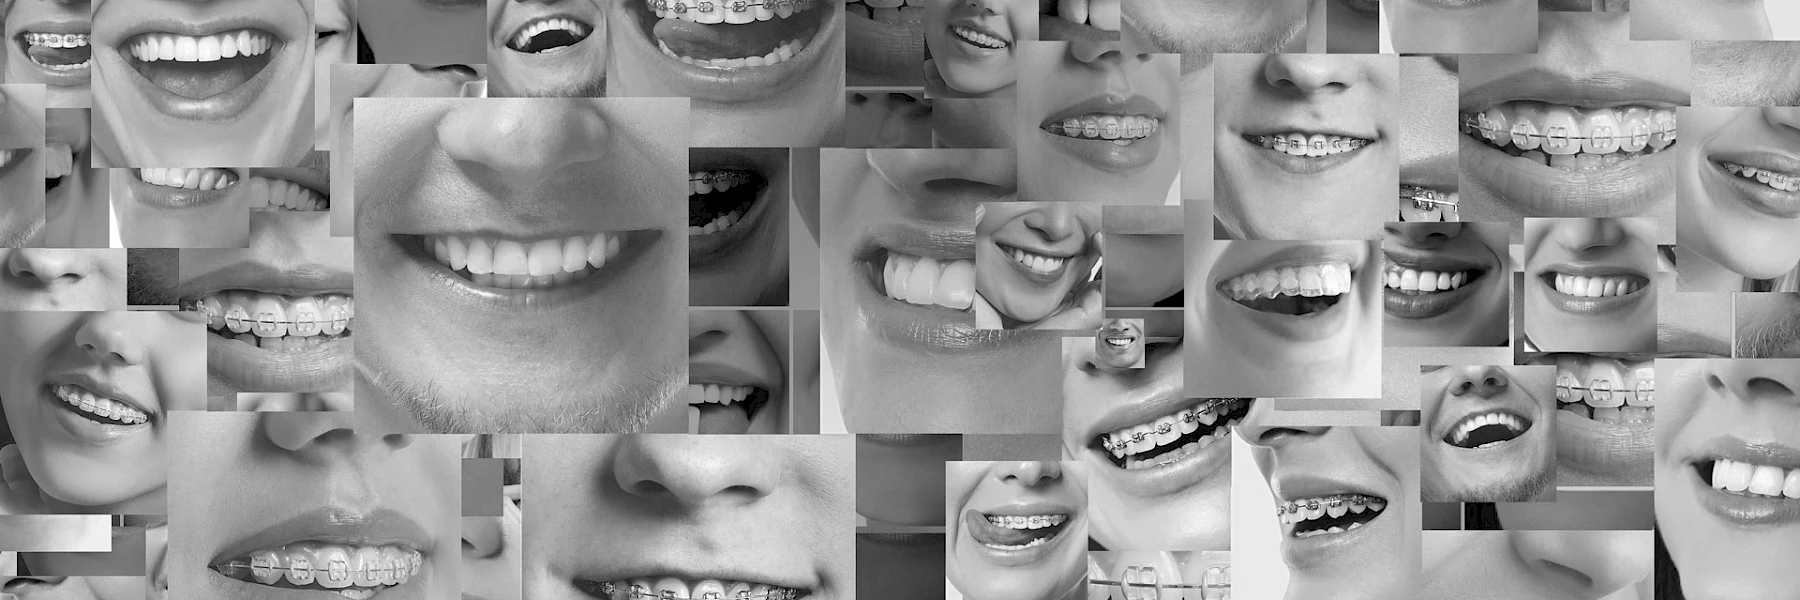 1_4_header_bw_mouth-collage_1920x700